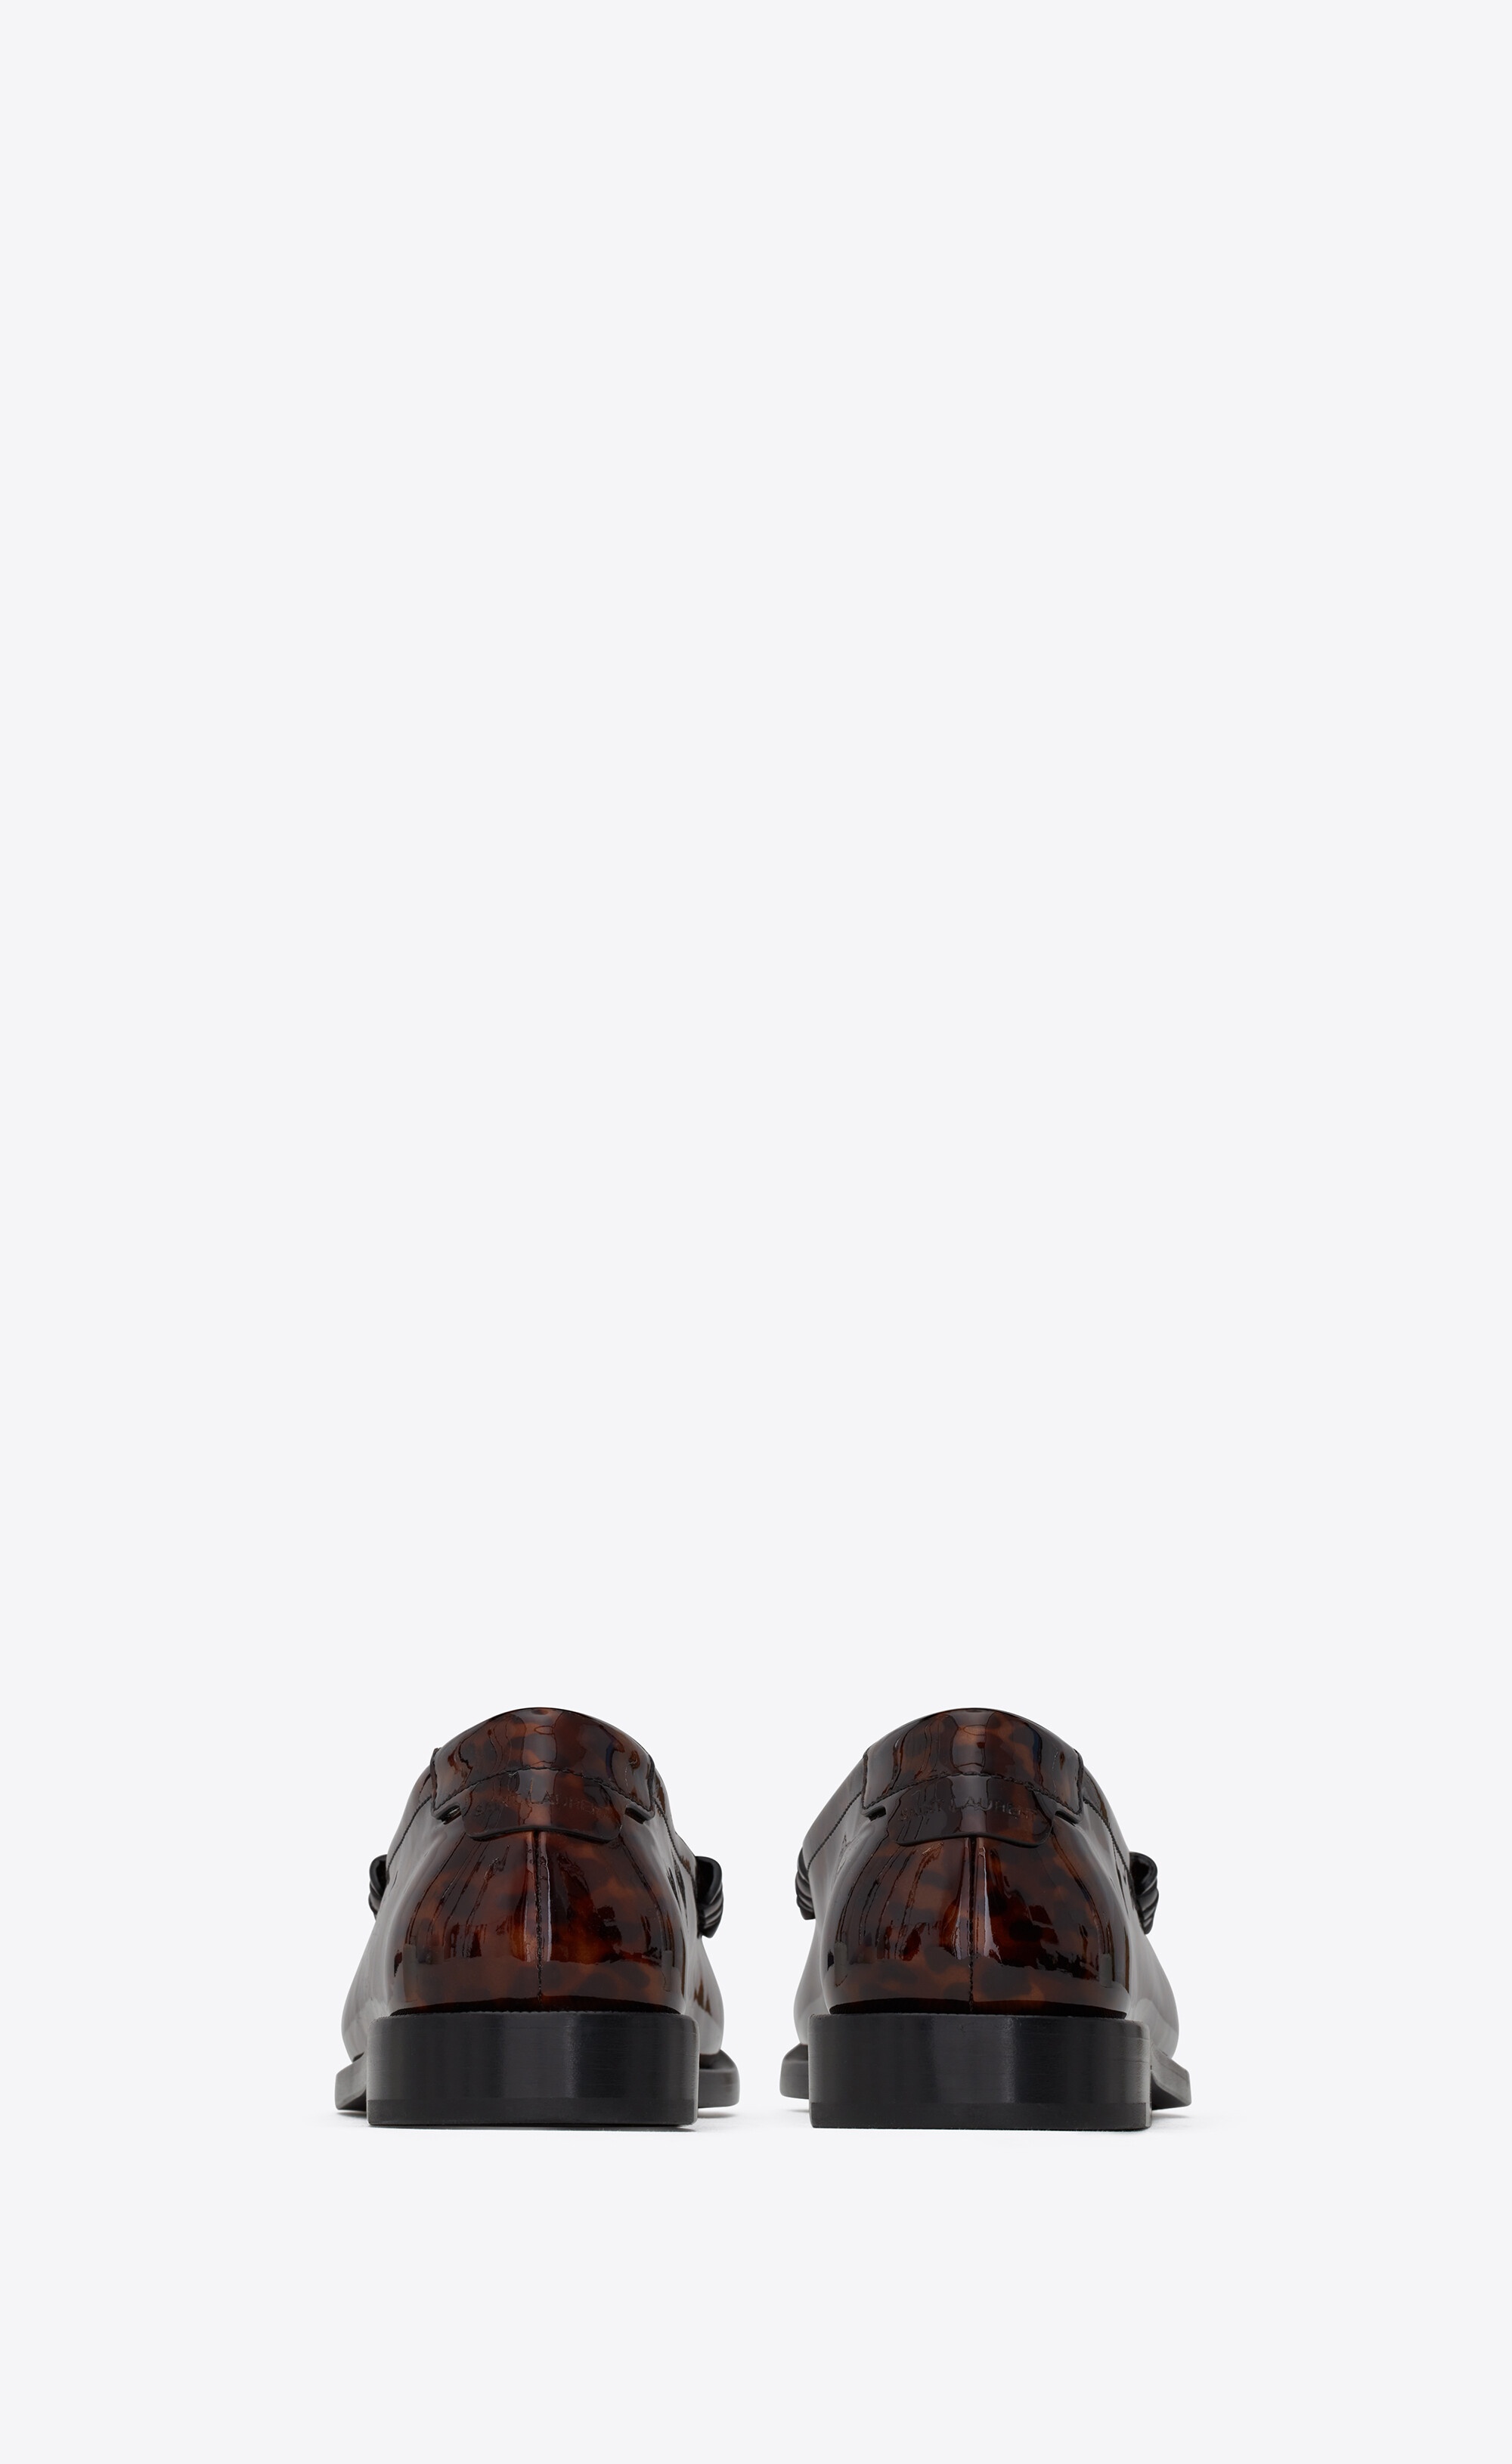 le loafer monogram penny slippers in tortoiseshell patent leather - 3